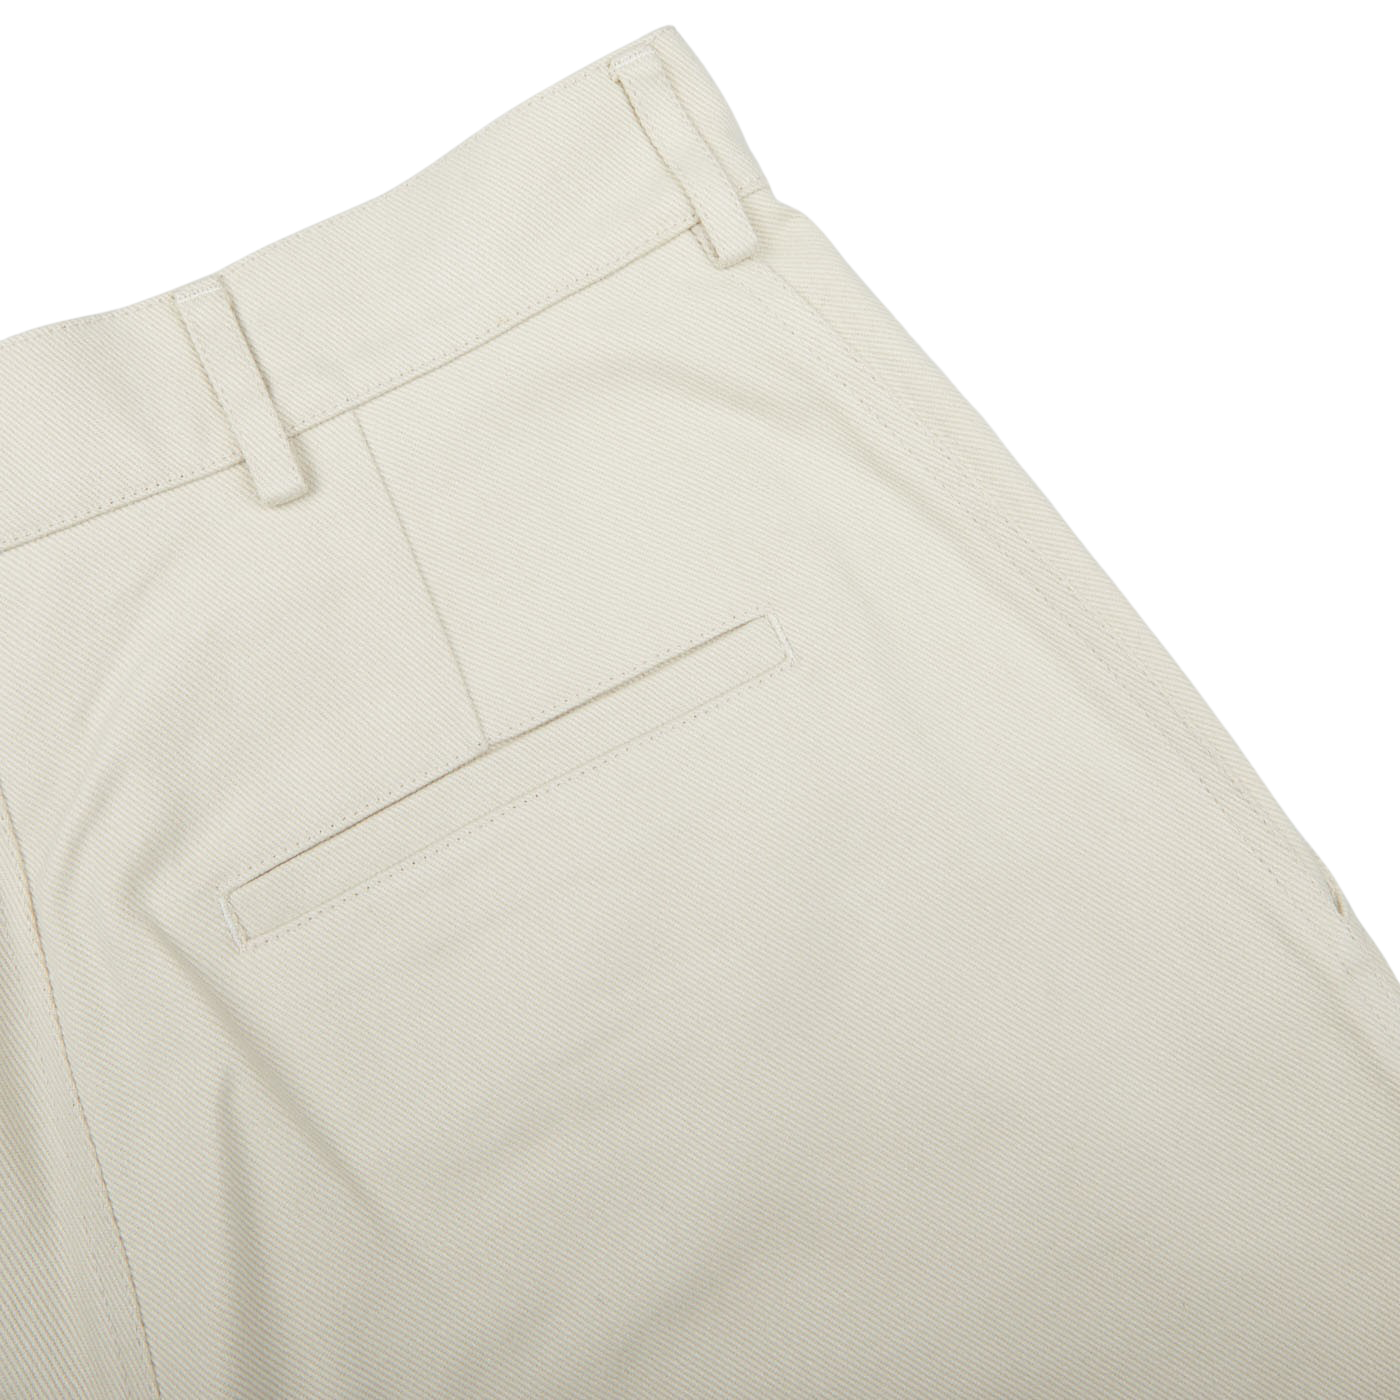 Close-up of a De Bonne Facture Undyed Heavy Cotton Drill Balloon Trousers waistband showing detailed stitching and a pocket.